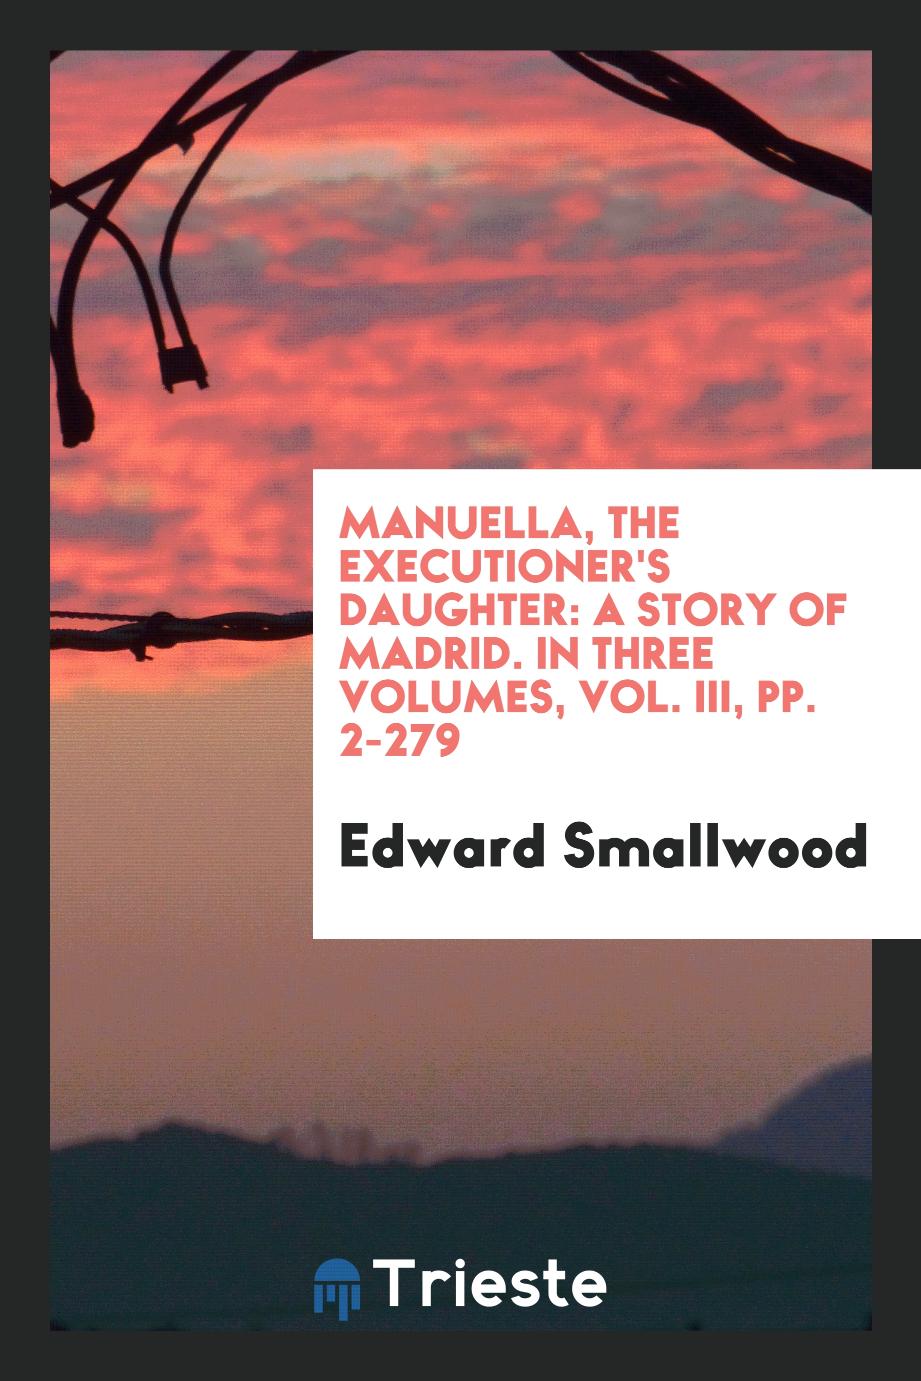 Manuella, the Executioner's Daughter: A Story of Madrid. In Three Volumes, Vol. III, pp. 2-279